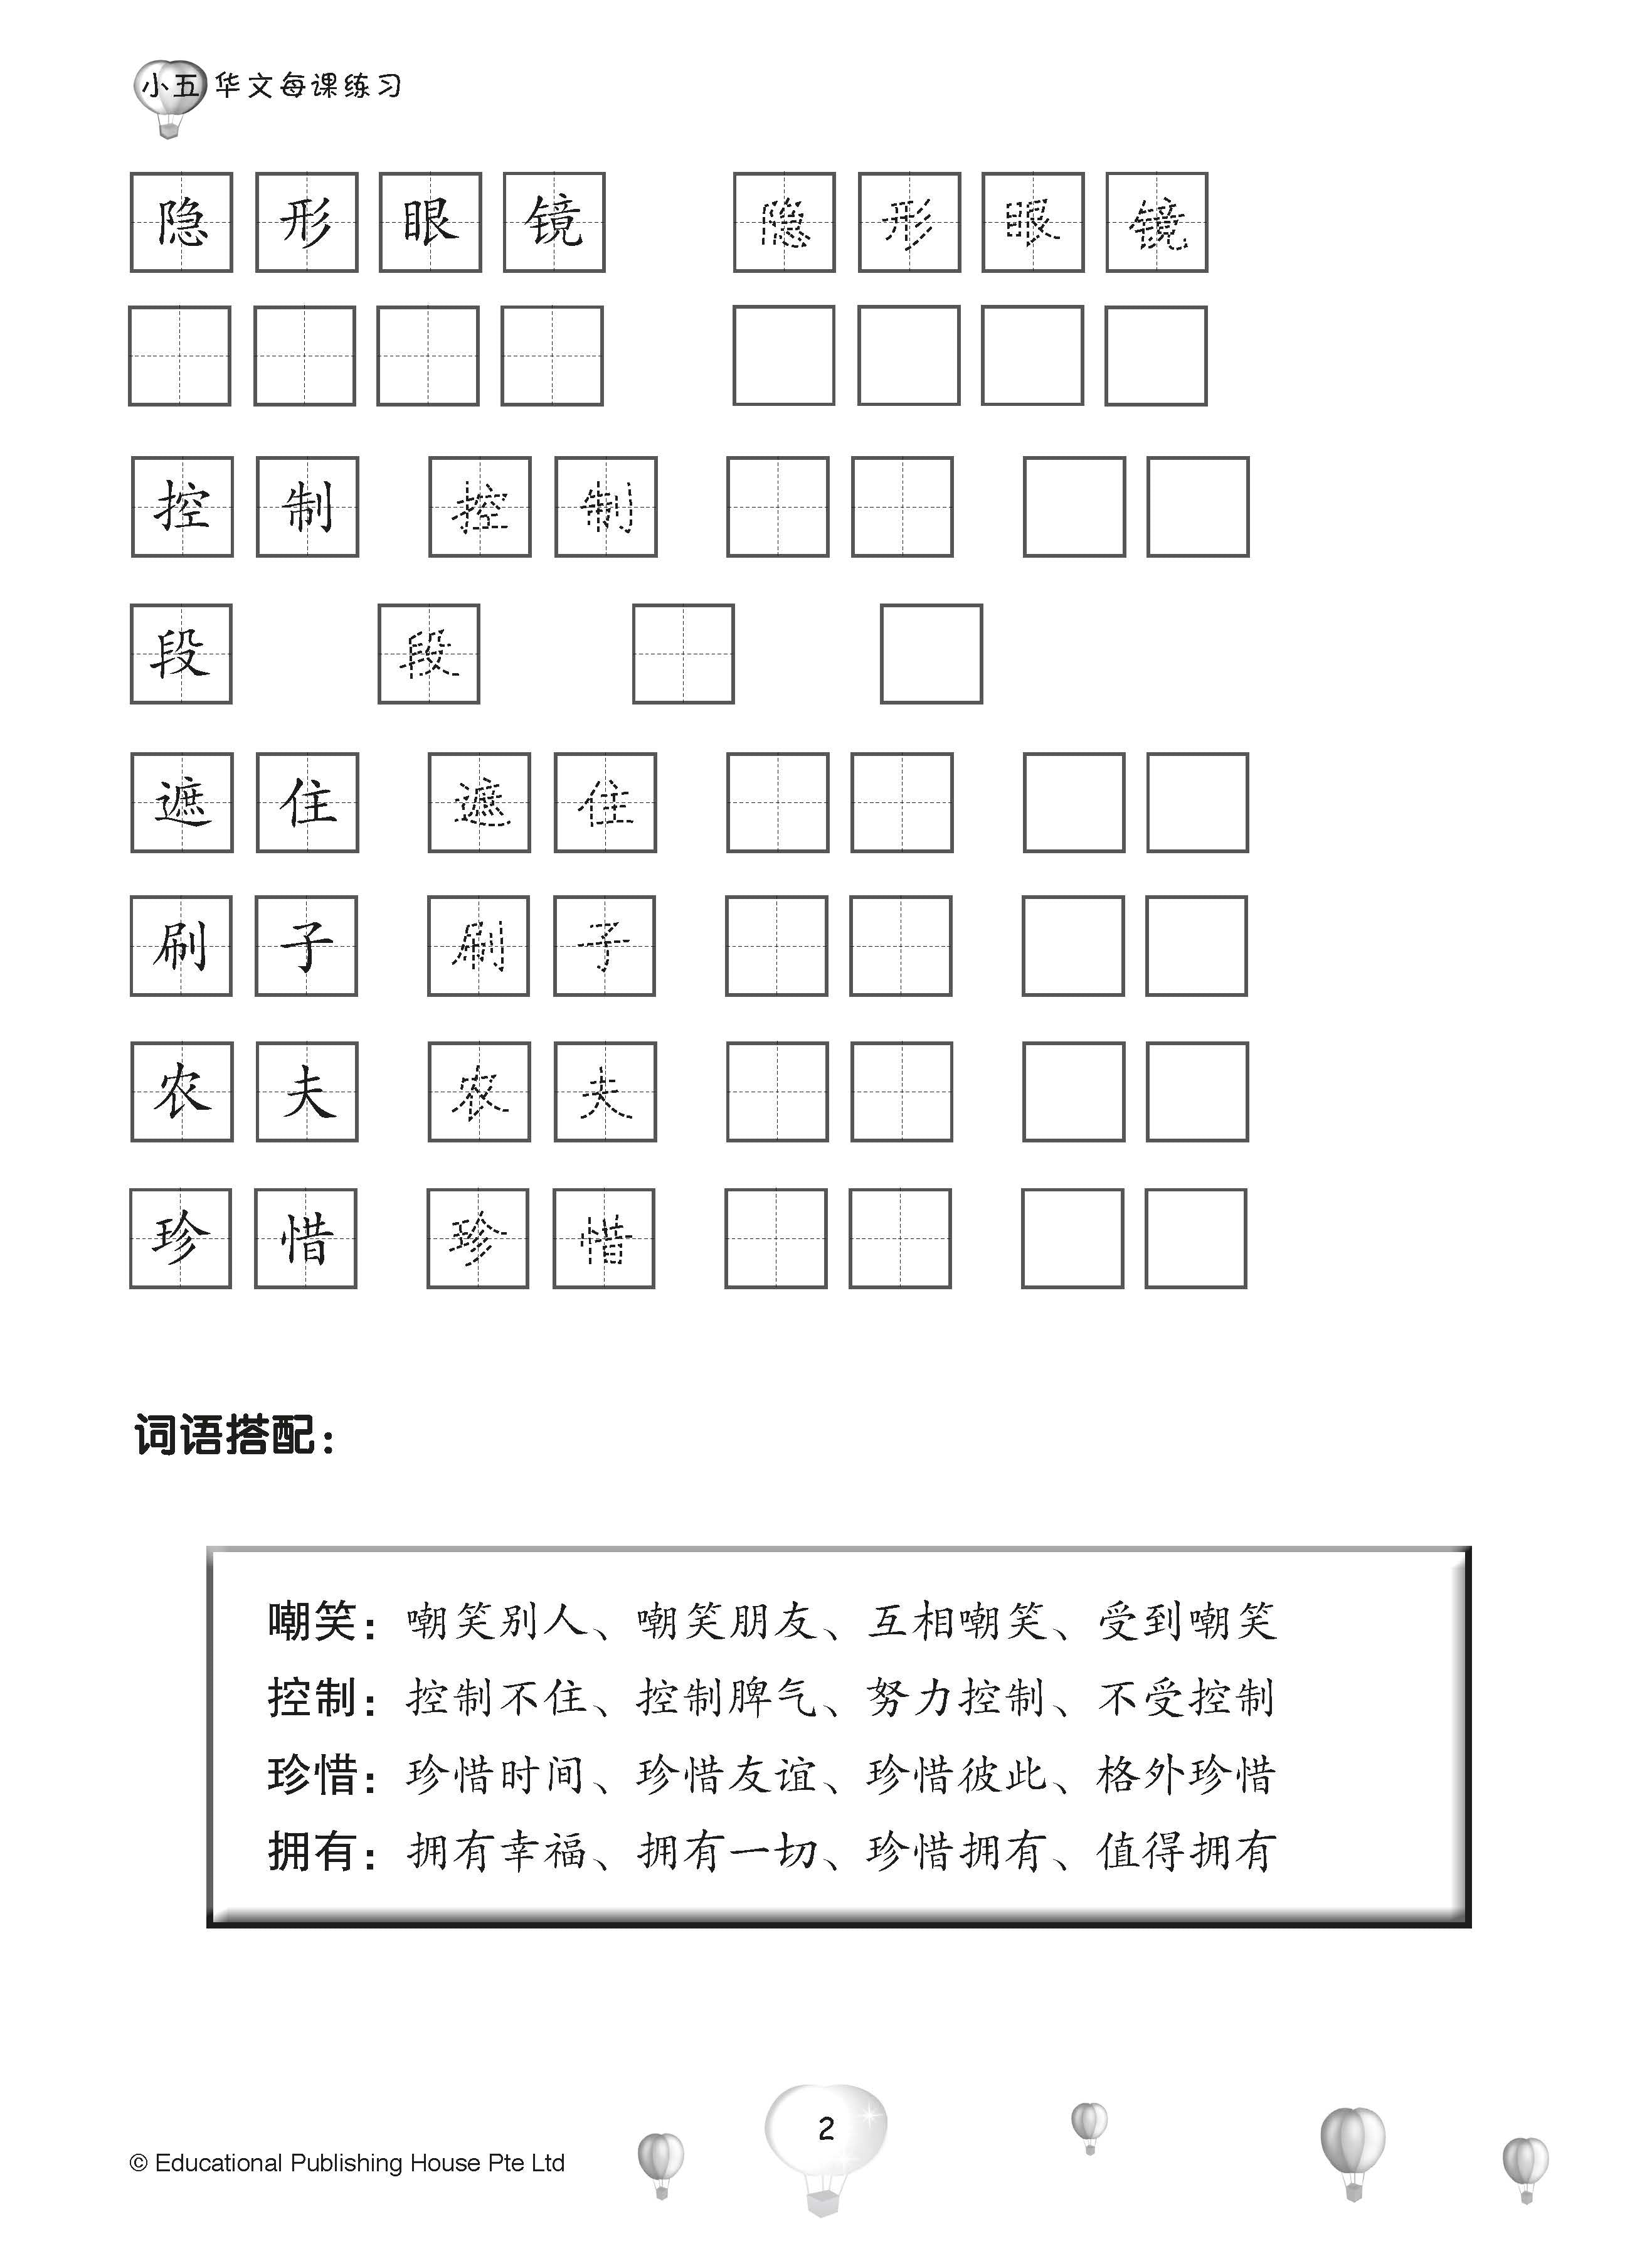 Primary 5B Score In Chinese 华文每课练习 - _MS, CHINESE, EDUCATIONAL PUBLISHING HOUSE, INTERMEDIATE, PRIMARY 5